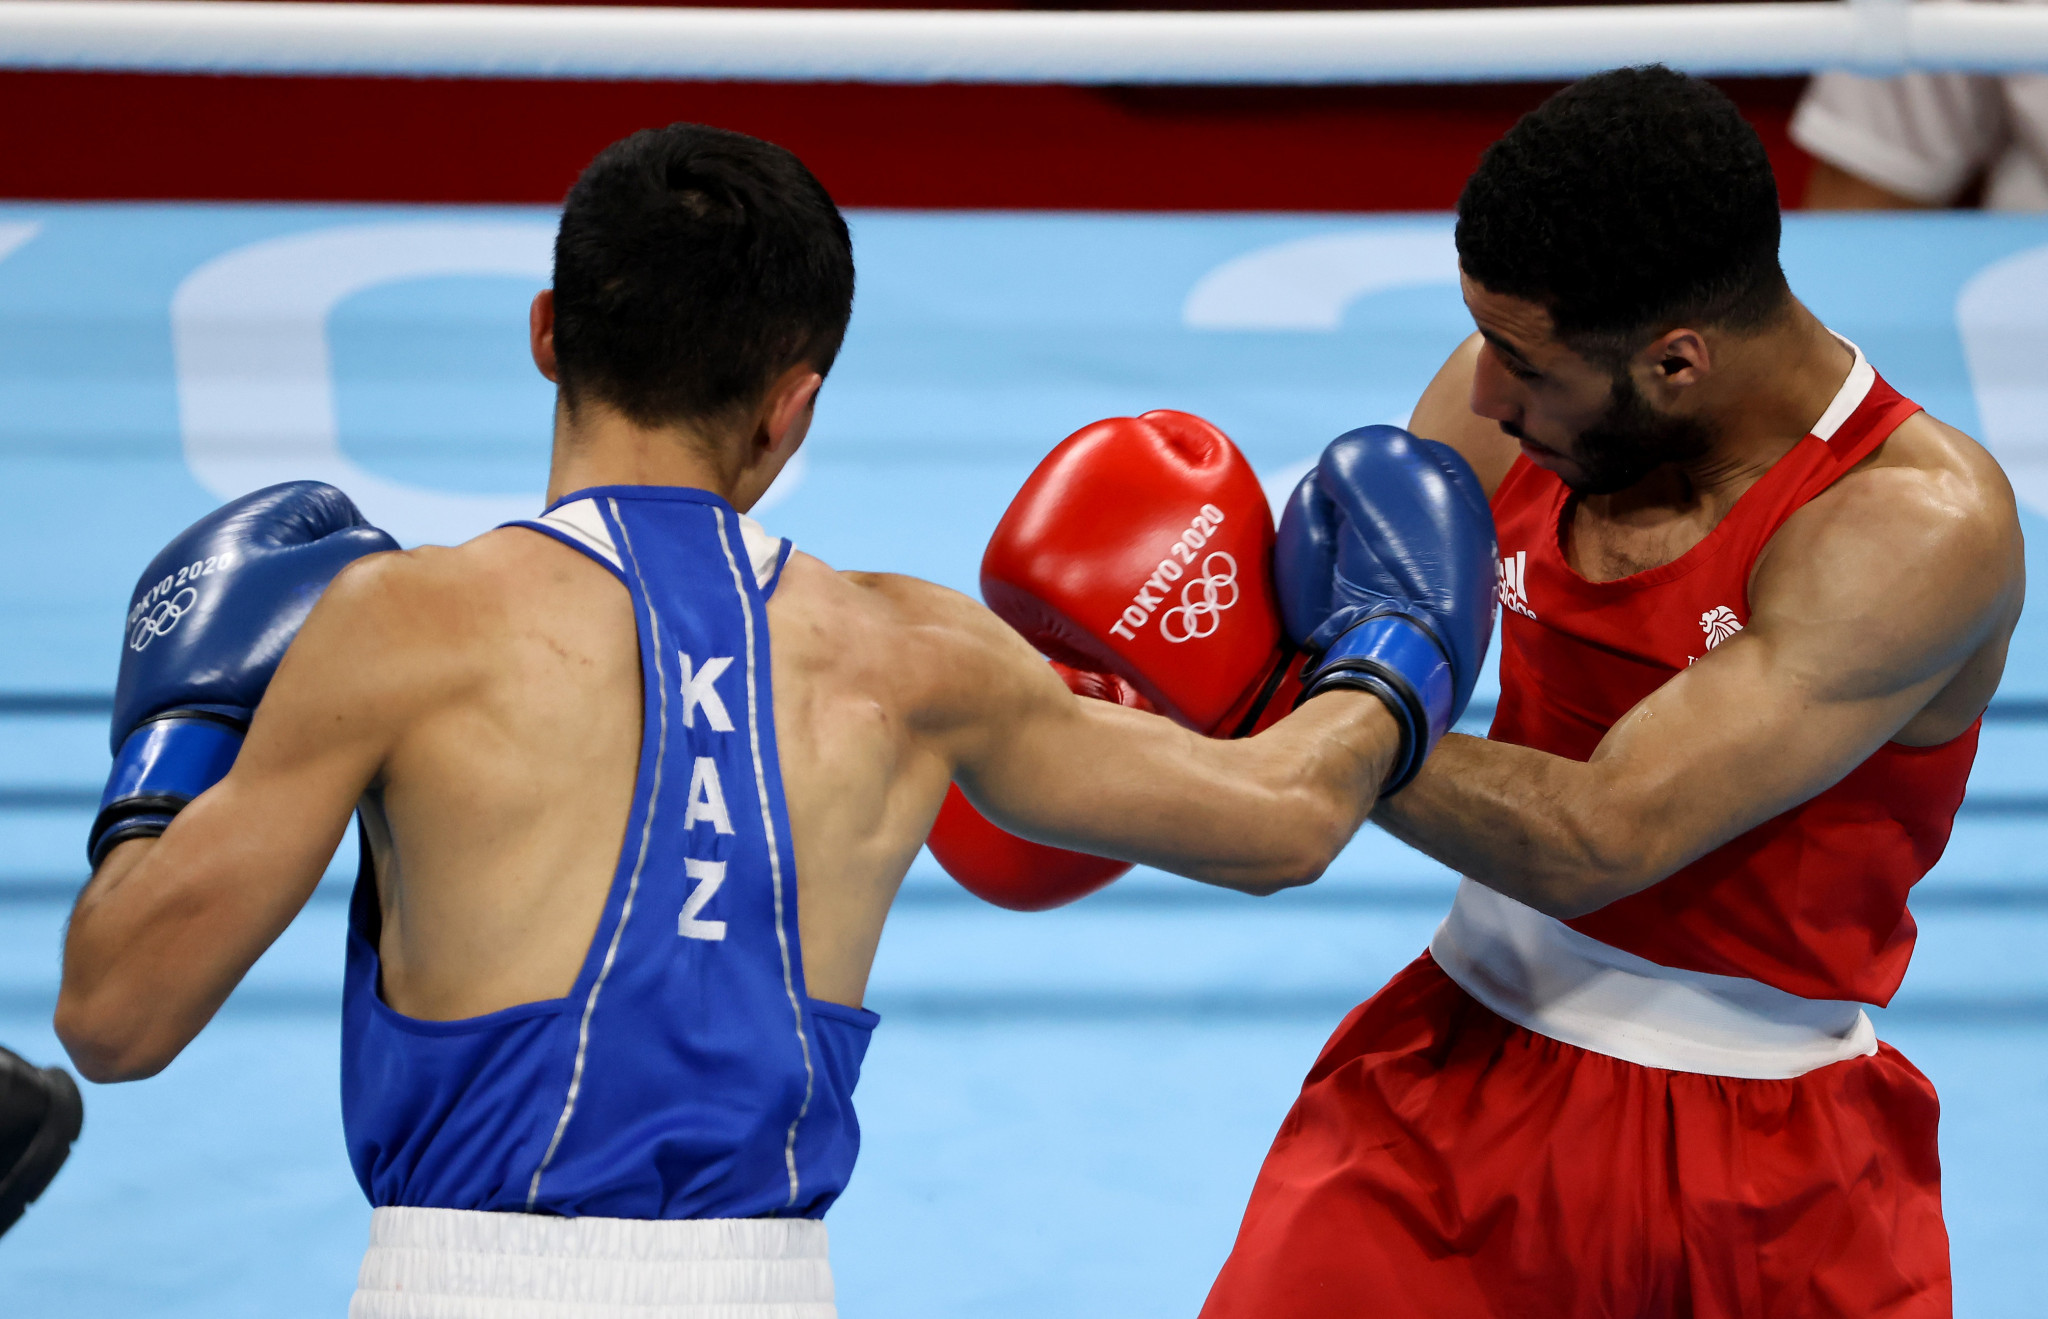 Kazakhstan claimed two medals in boxing at Tokyo 2020 and will hope for more success at Paris 2024 ©Getty Images